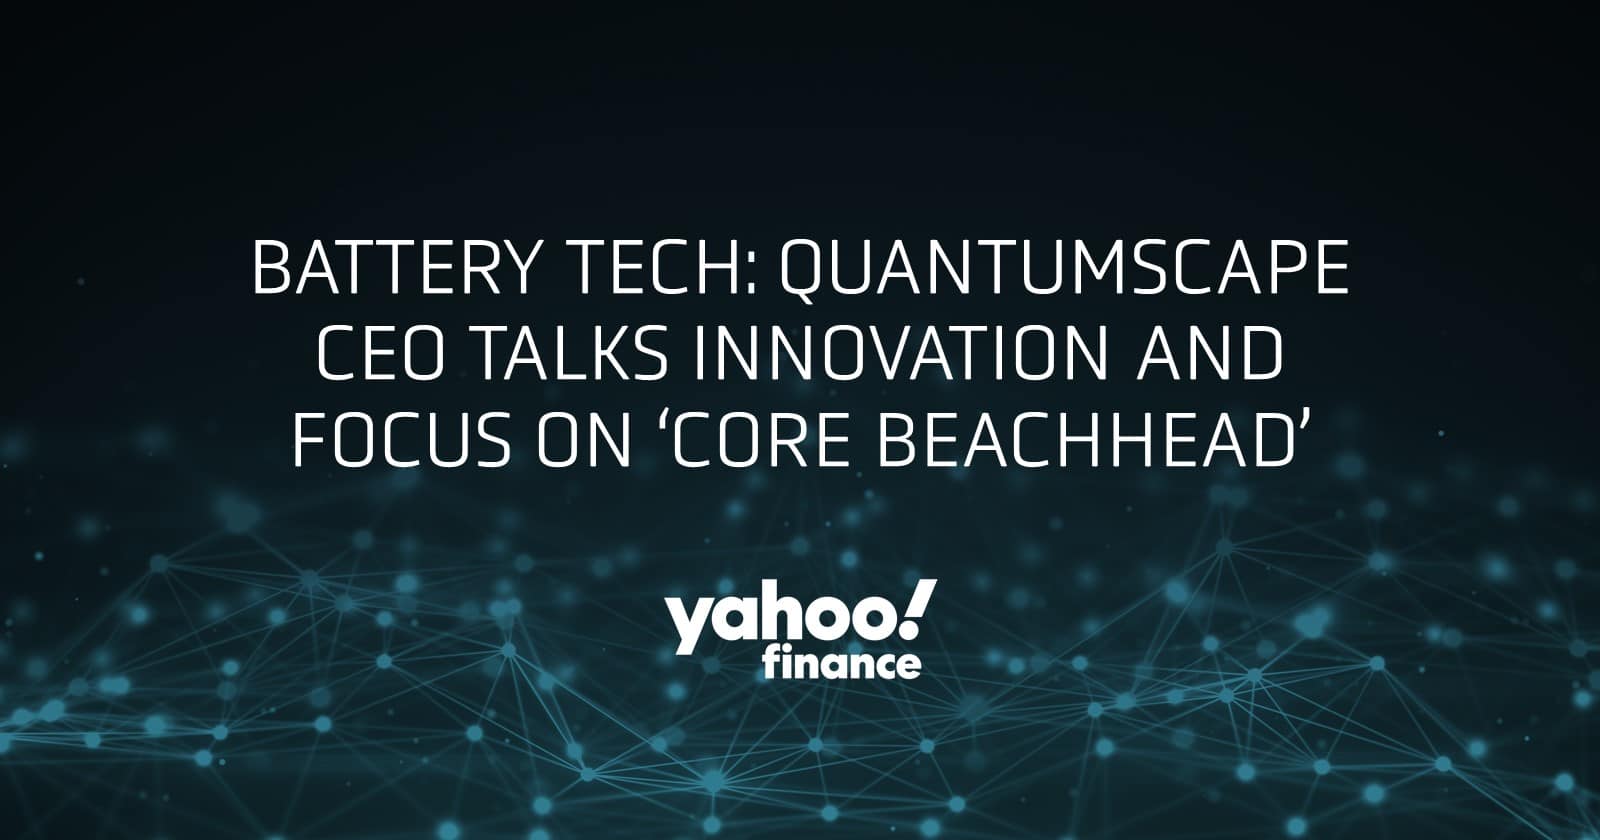 Yahoo! Finance, Battery tech: QuantumScape CEO talks innovation and focus on ‘core beachhead’